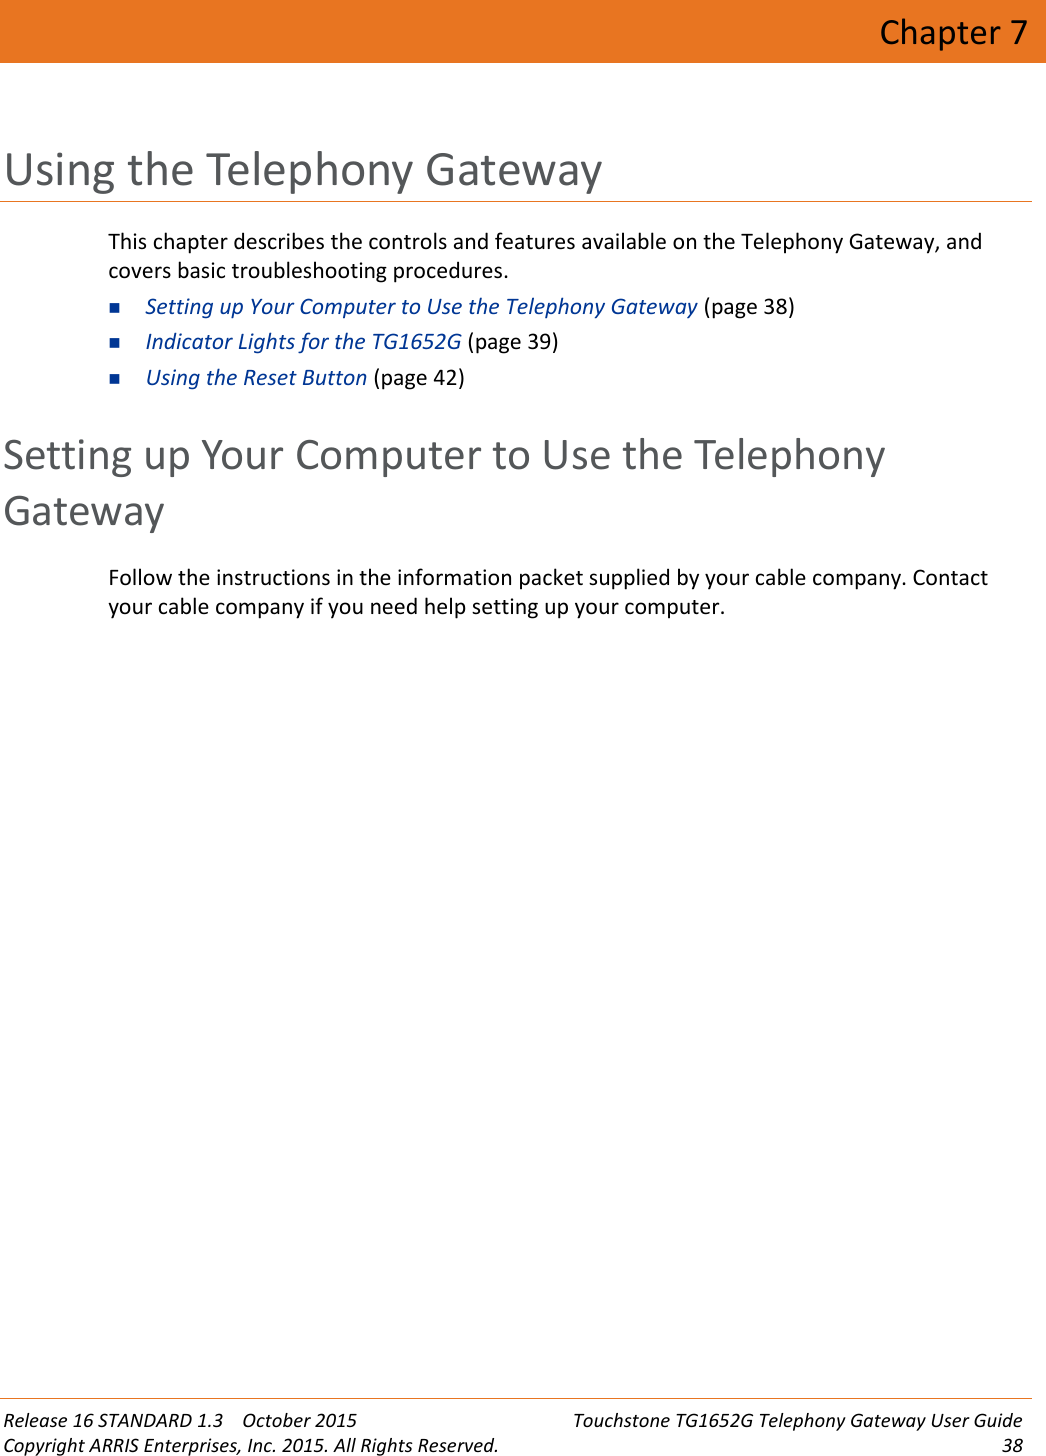 Release 16 STANDARD 1.3 October 2015 Touchstone TG1652G Telephony Gateway User GuideCopyright ARRIS Enterprises, Inc. 2015. All Rights Reserved. 38Chapter 7Using the Telephony GatewayThis chapter describes the controls and features available on the Telephony Gateway, andcovers basic troubleshooting procedures.Setting up Your Computer to Use the Telephony Gateway (page 38)Indicator Lights for the TG1652G (page 39)Using the Reset Button (page 42)Setting up Your Computer to Use the TelephonyGatewayFollow the instructions in the information packet supplied by your cable company. Contactyour cable company if you need help setting up your computer.